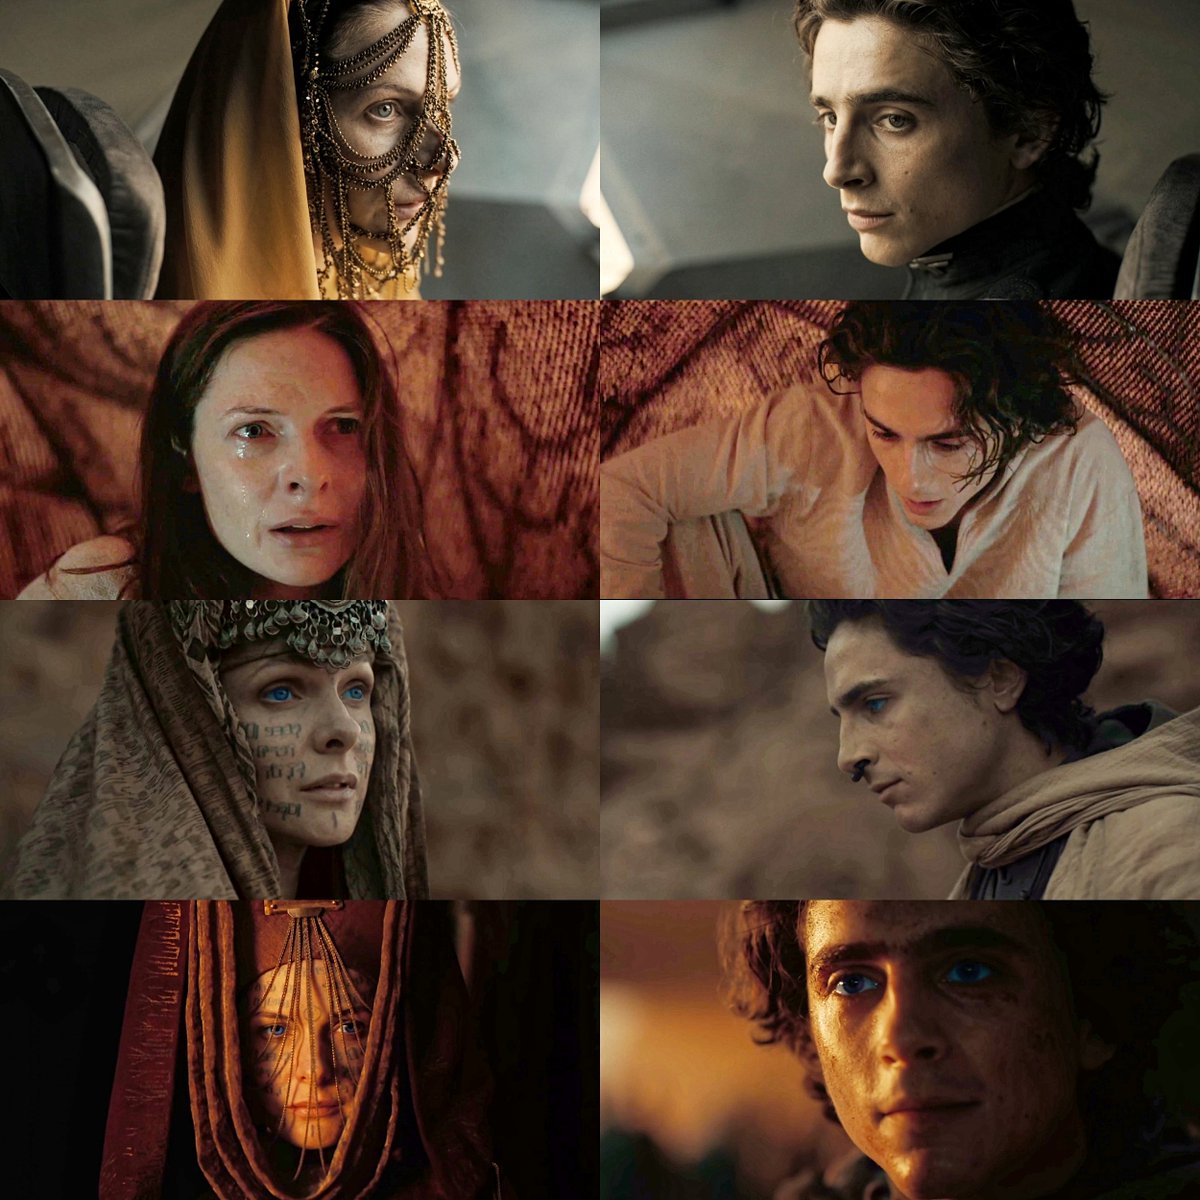 'These people have waited for centuries for the Lisan Al-Gaib. They see you, they see the signs.' Lady Jessica & Paul #RebeccaFerguson #TimotheeChalamet #DuneMovie #DunePartTwo